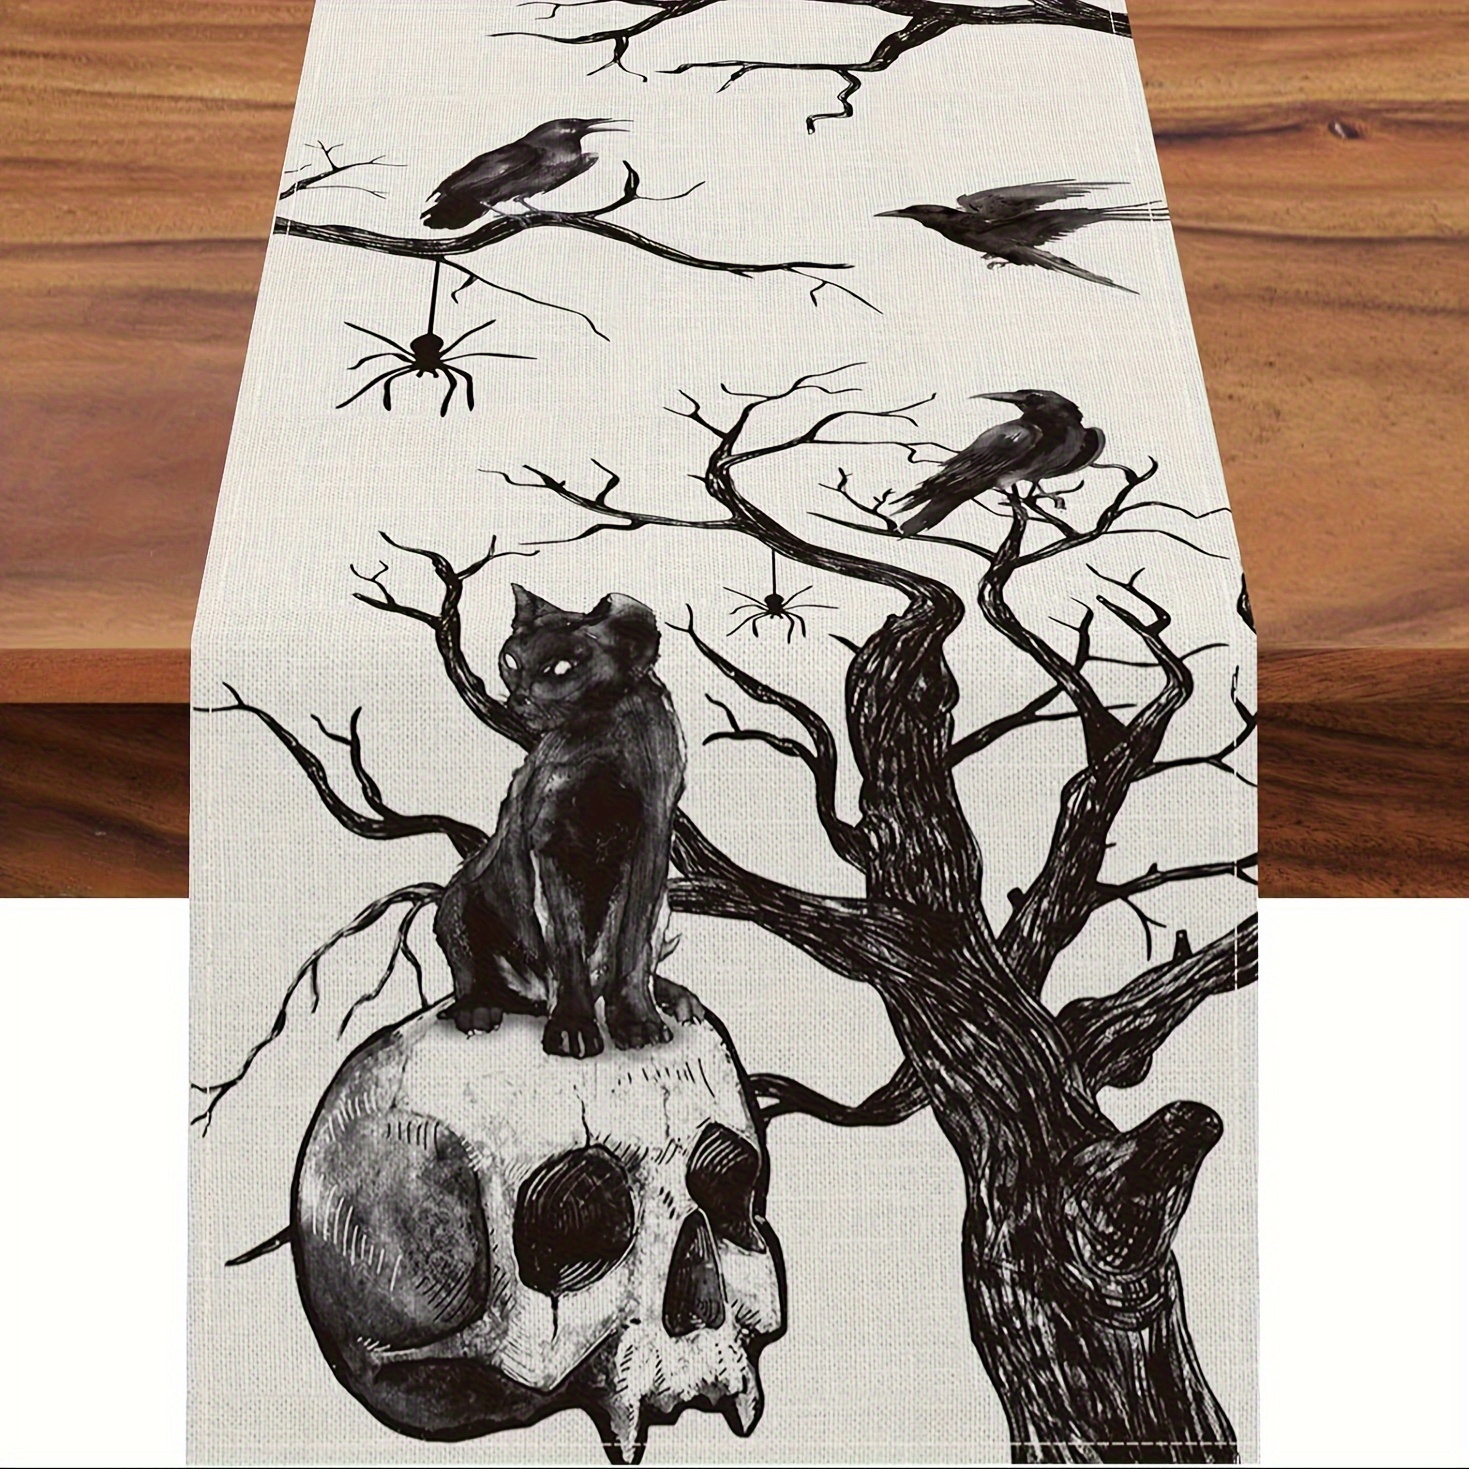 

1pc, Table Runner, Halloween Theme Black Cat And Printed Table Runner, Dustproof & Wipe Clean Table Runner, Perfect For Home Party Decor, Dining Table Decoration, Festival Party Decor, Fall Decor